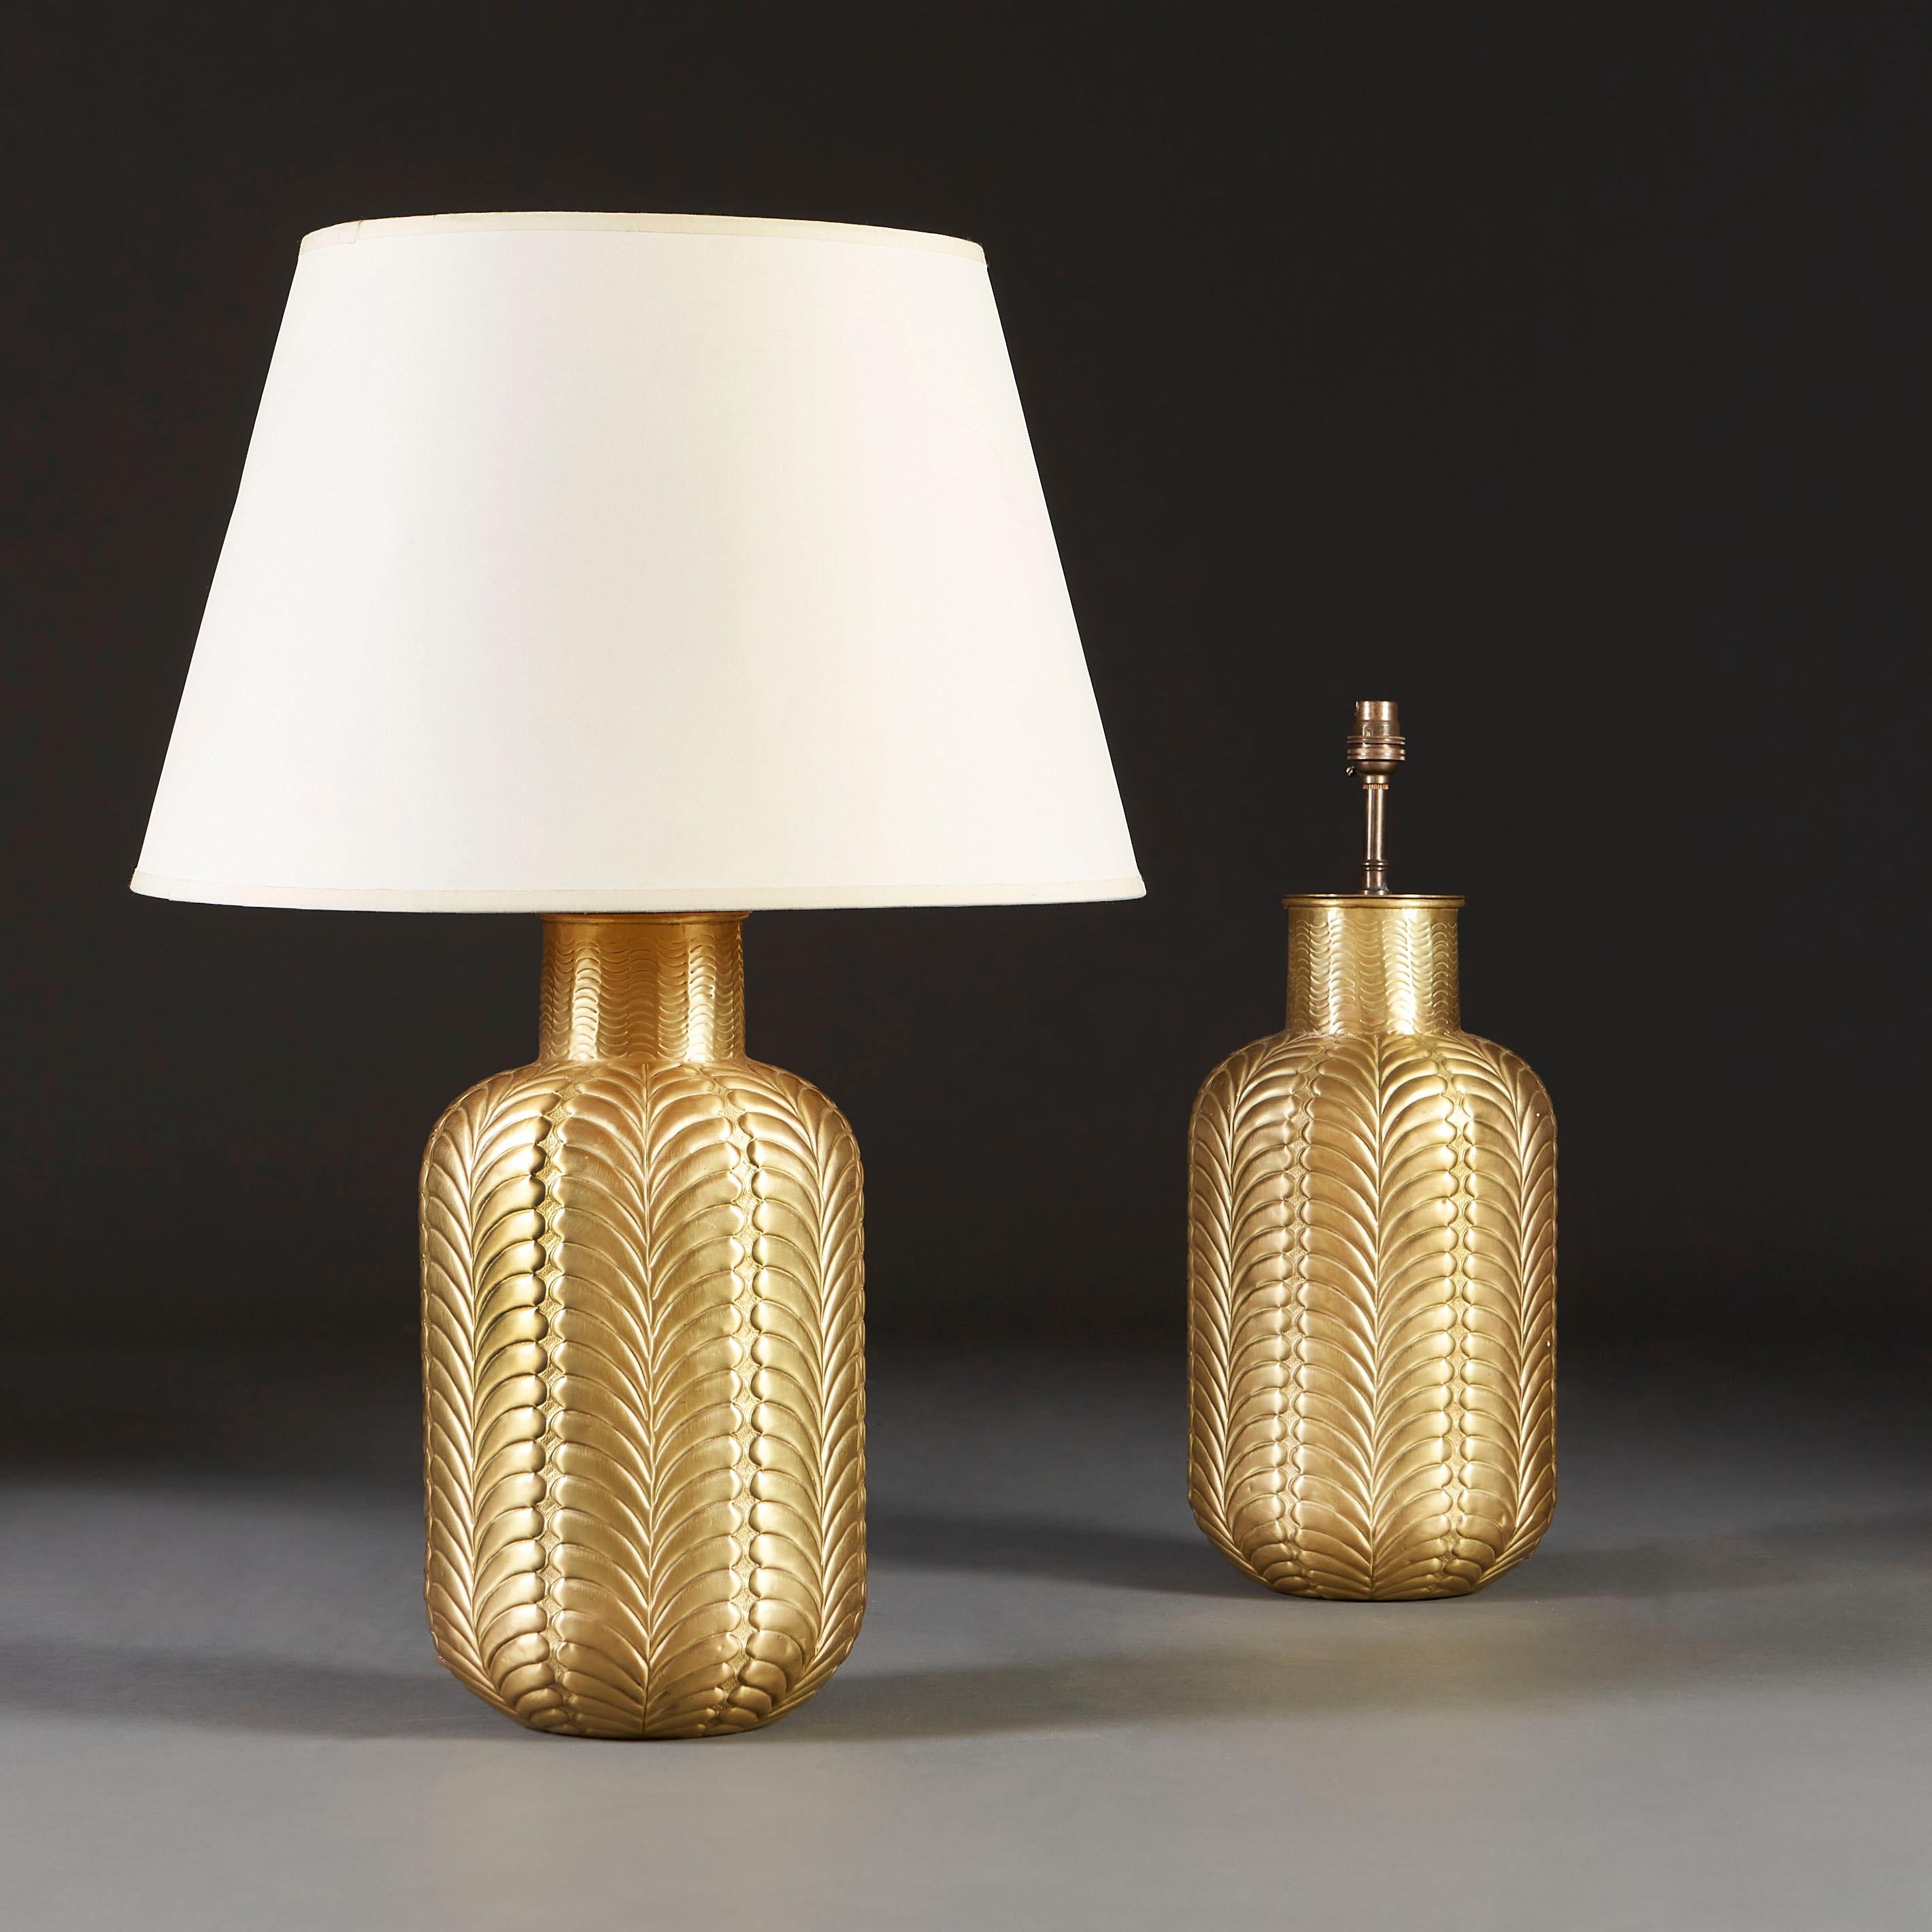 A pair of palm leaf pattern brass vases now mounted as lamps.

Currently wired for the UK.

Please note: Lampshades not included.